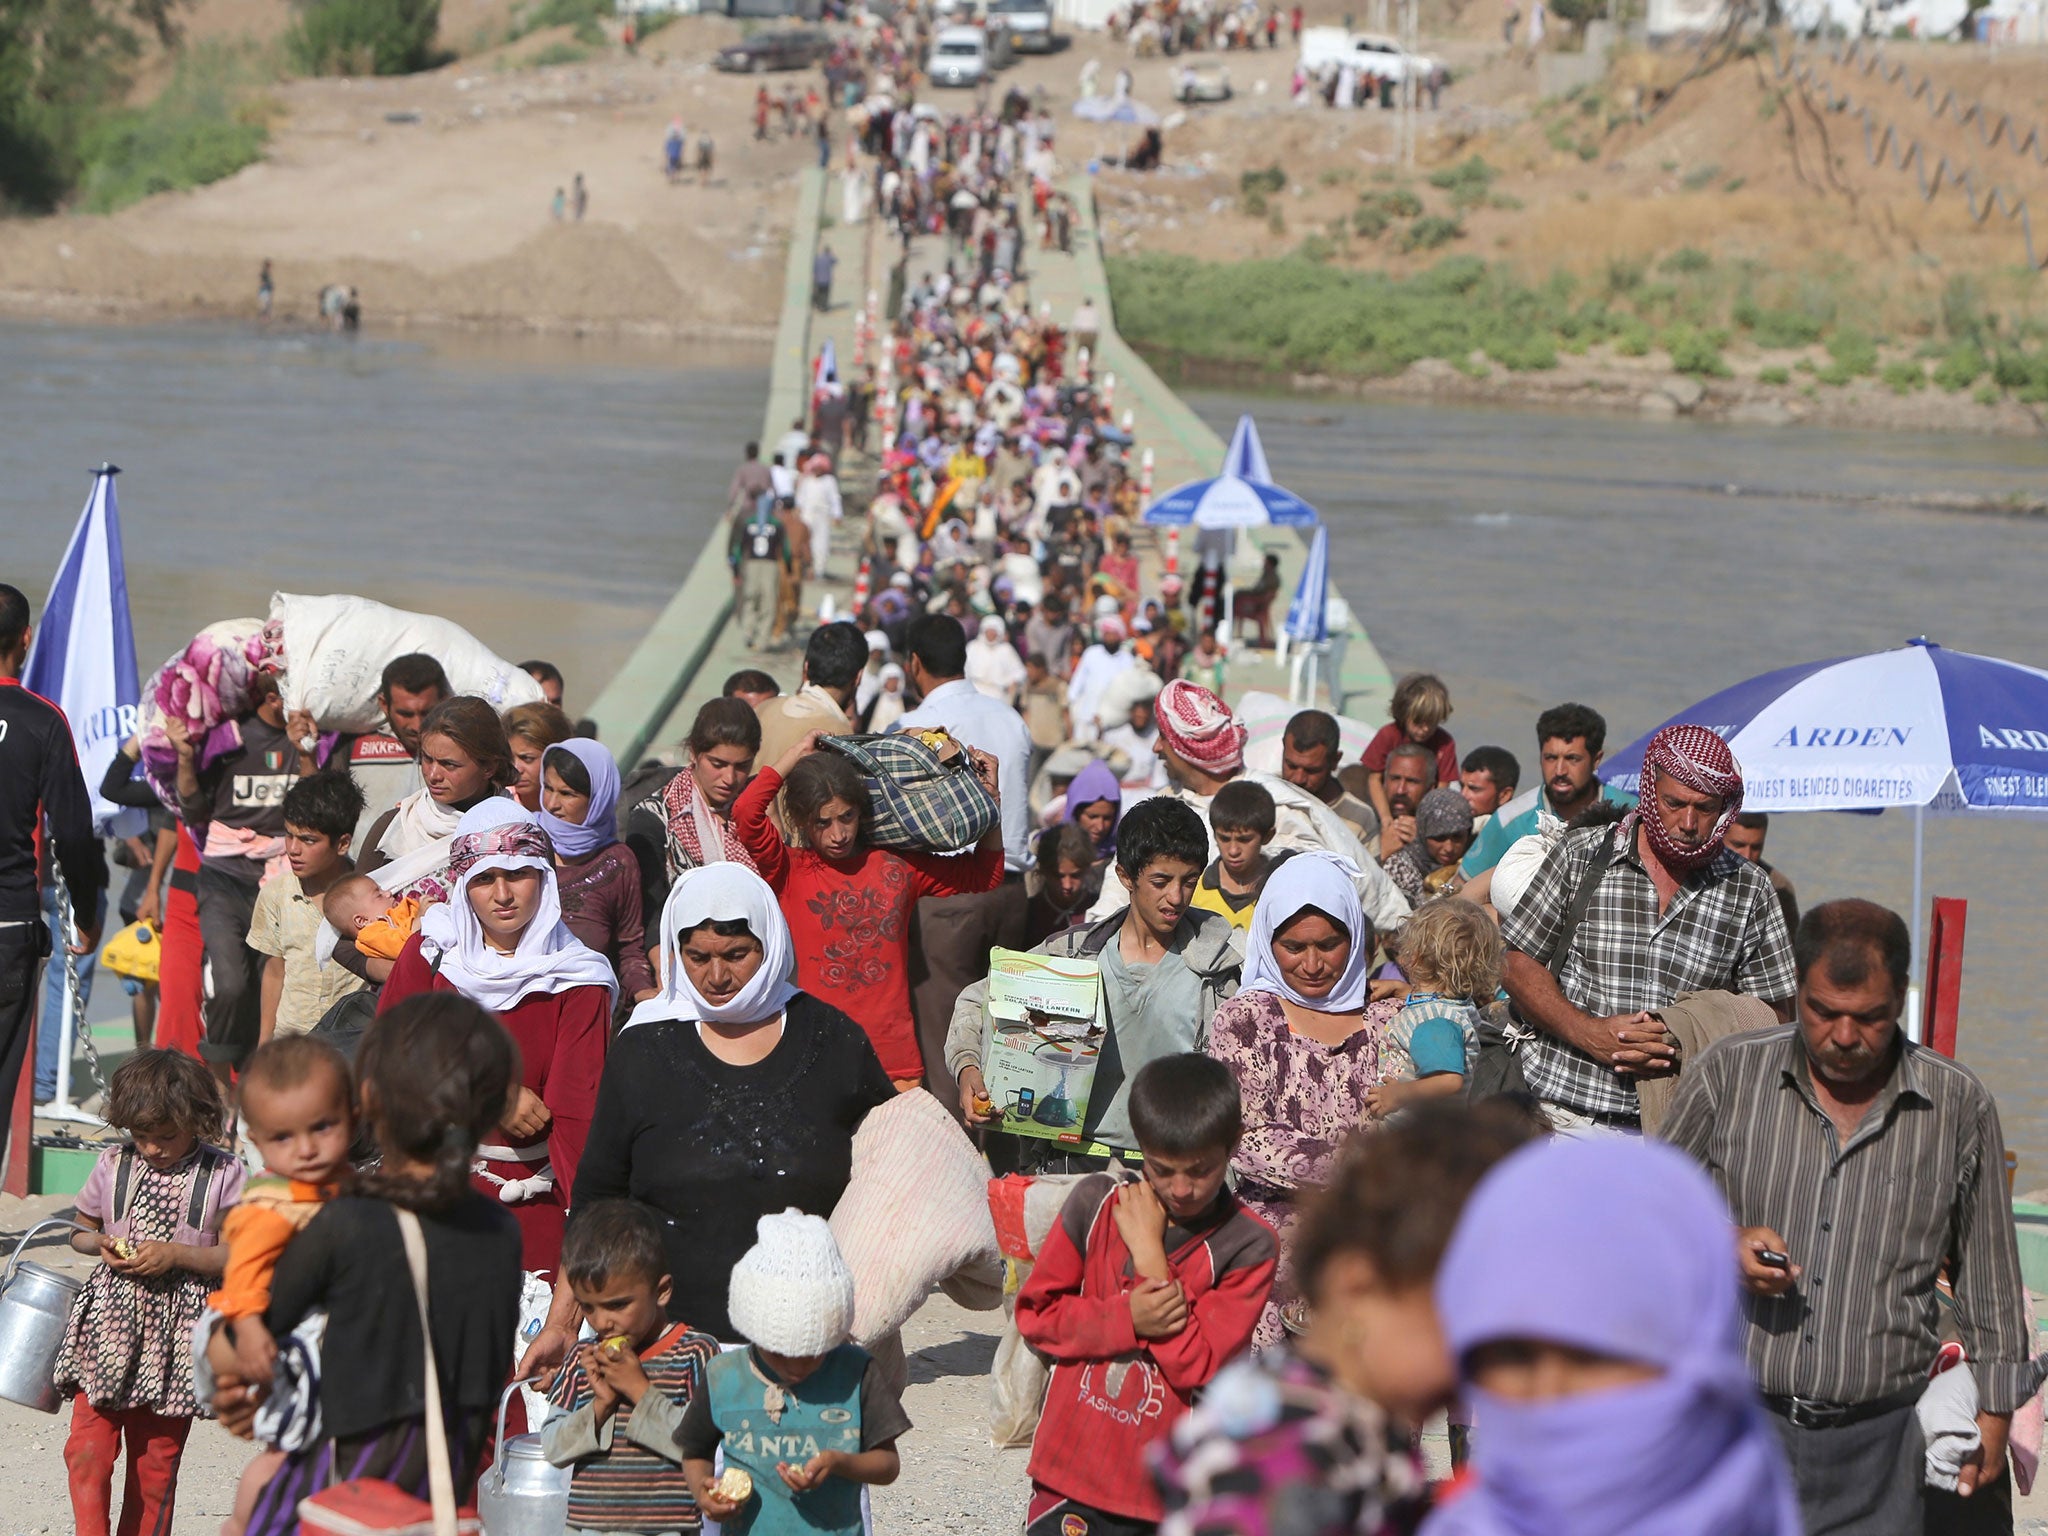 Displaced Iraqis from the Yazidi community cross the Syrian-Iraqi border along the Fishkhabur bridge over the Tigris River at the Fishkhabur crossing, in northern Iraq, on August 13, 2014. At least 20,000 civilians, most of whom are from the Yazidi commun